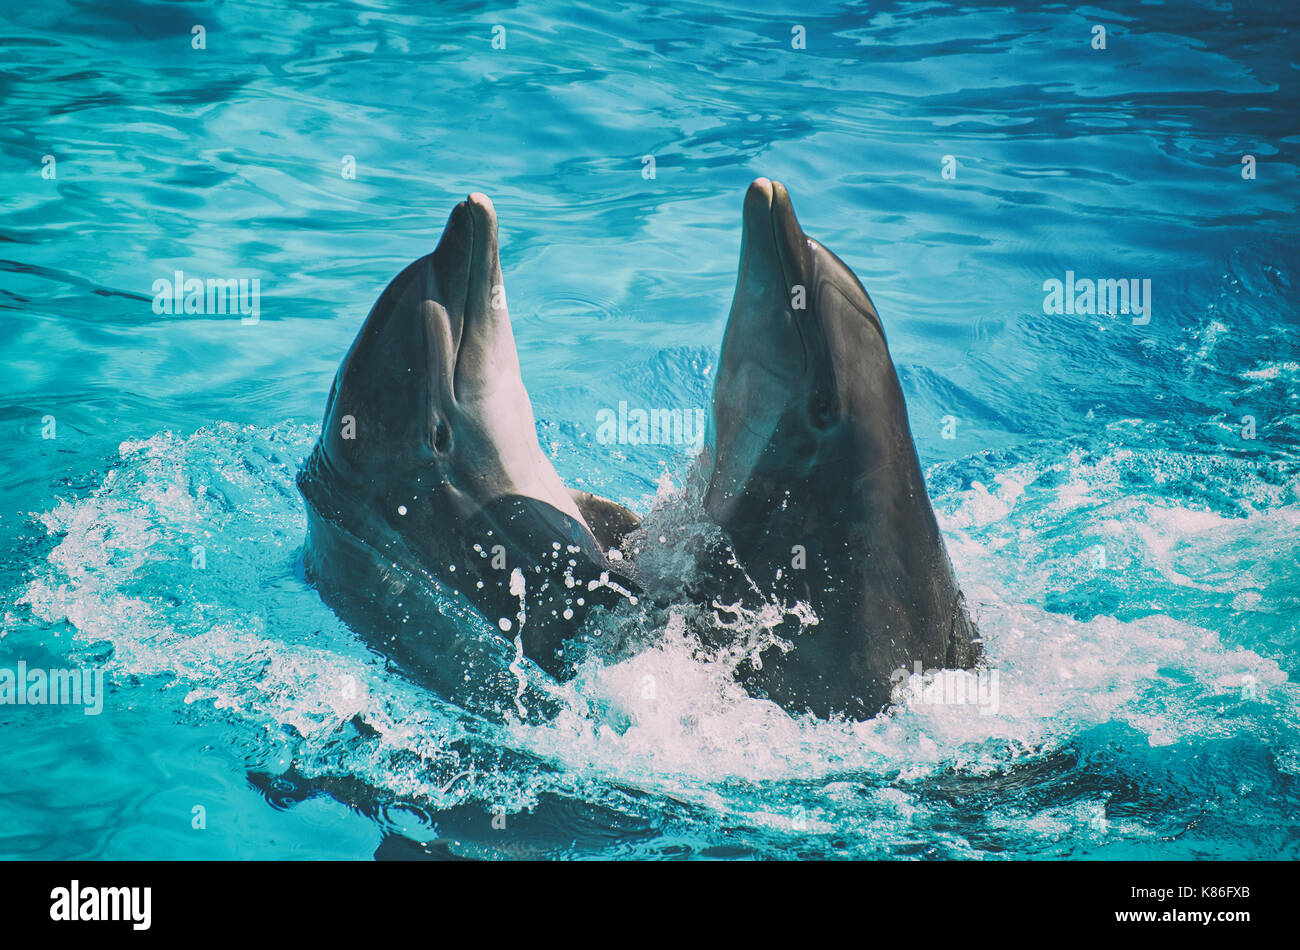 Two dolphins dancing in water. Stock Photo